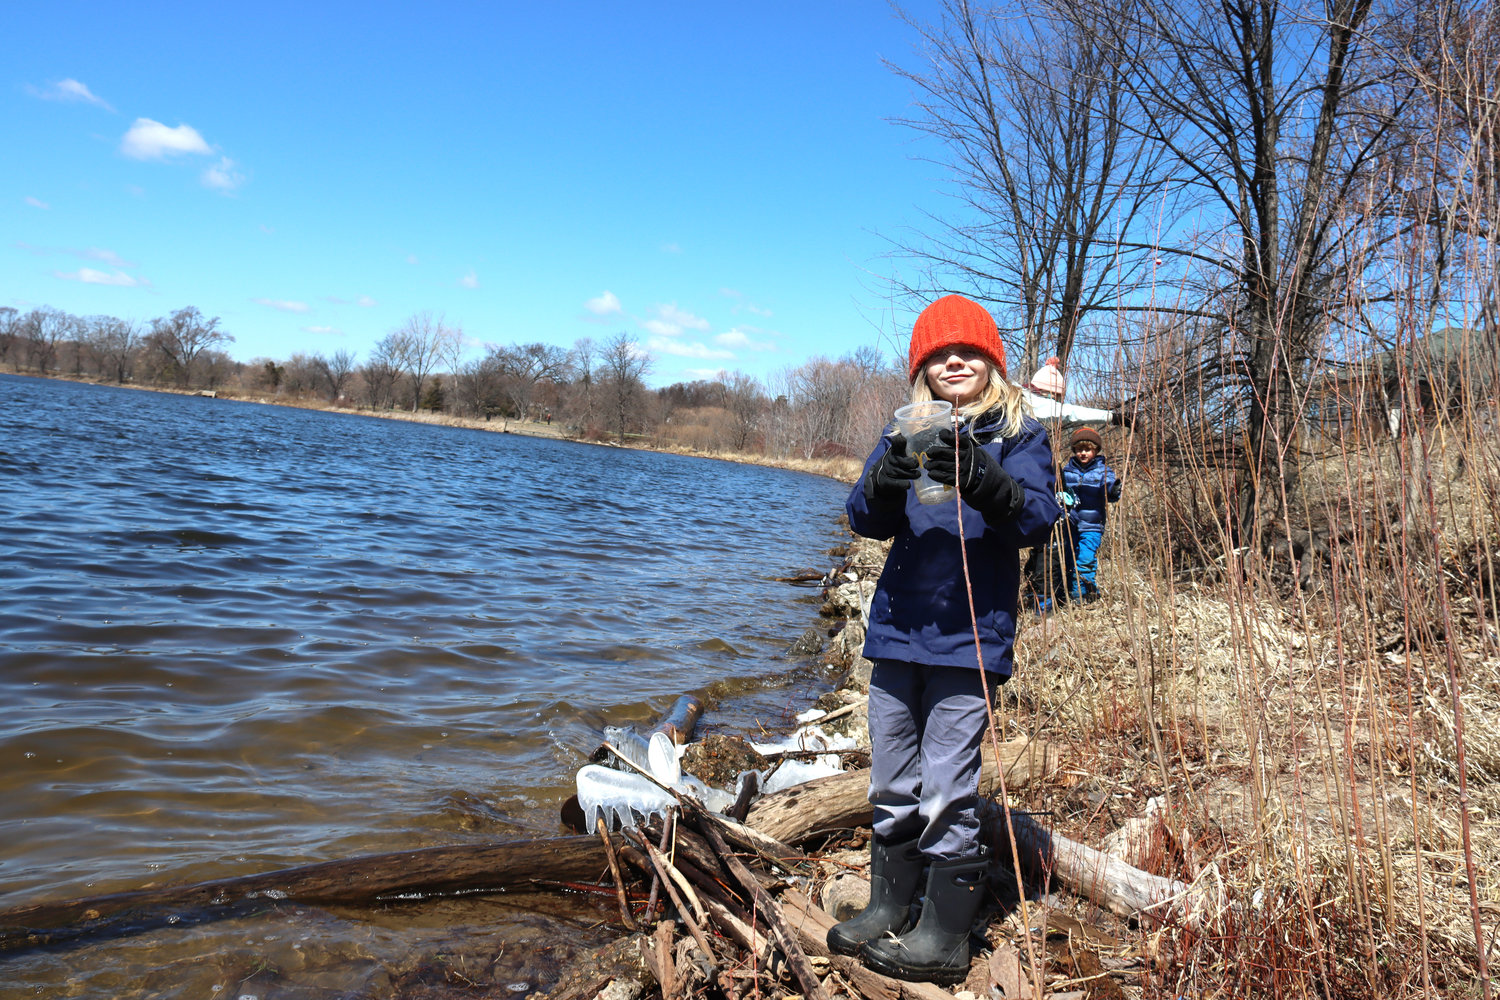 Weston Cavender, 6, picks up trash and explores along the shore of Lake Hiawatha near the recreation center. The golf course property is seen in the background.